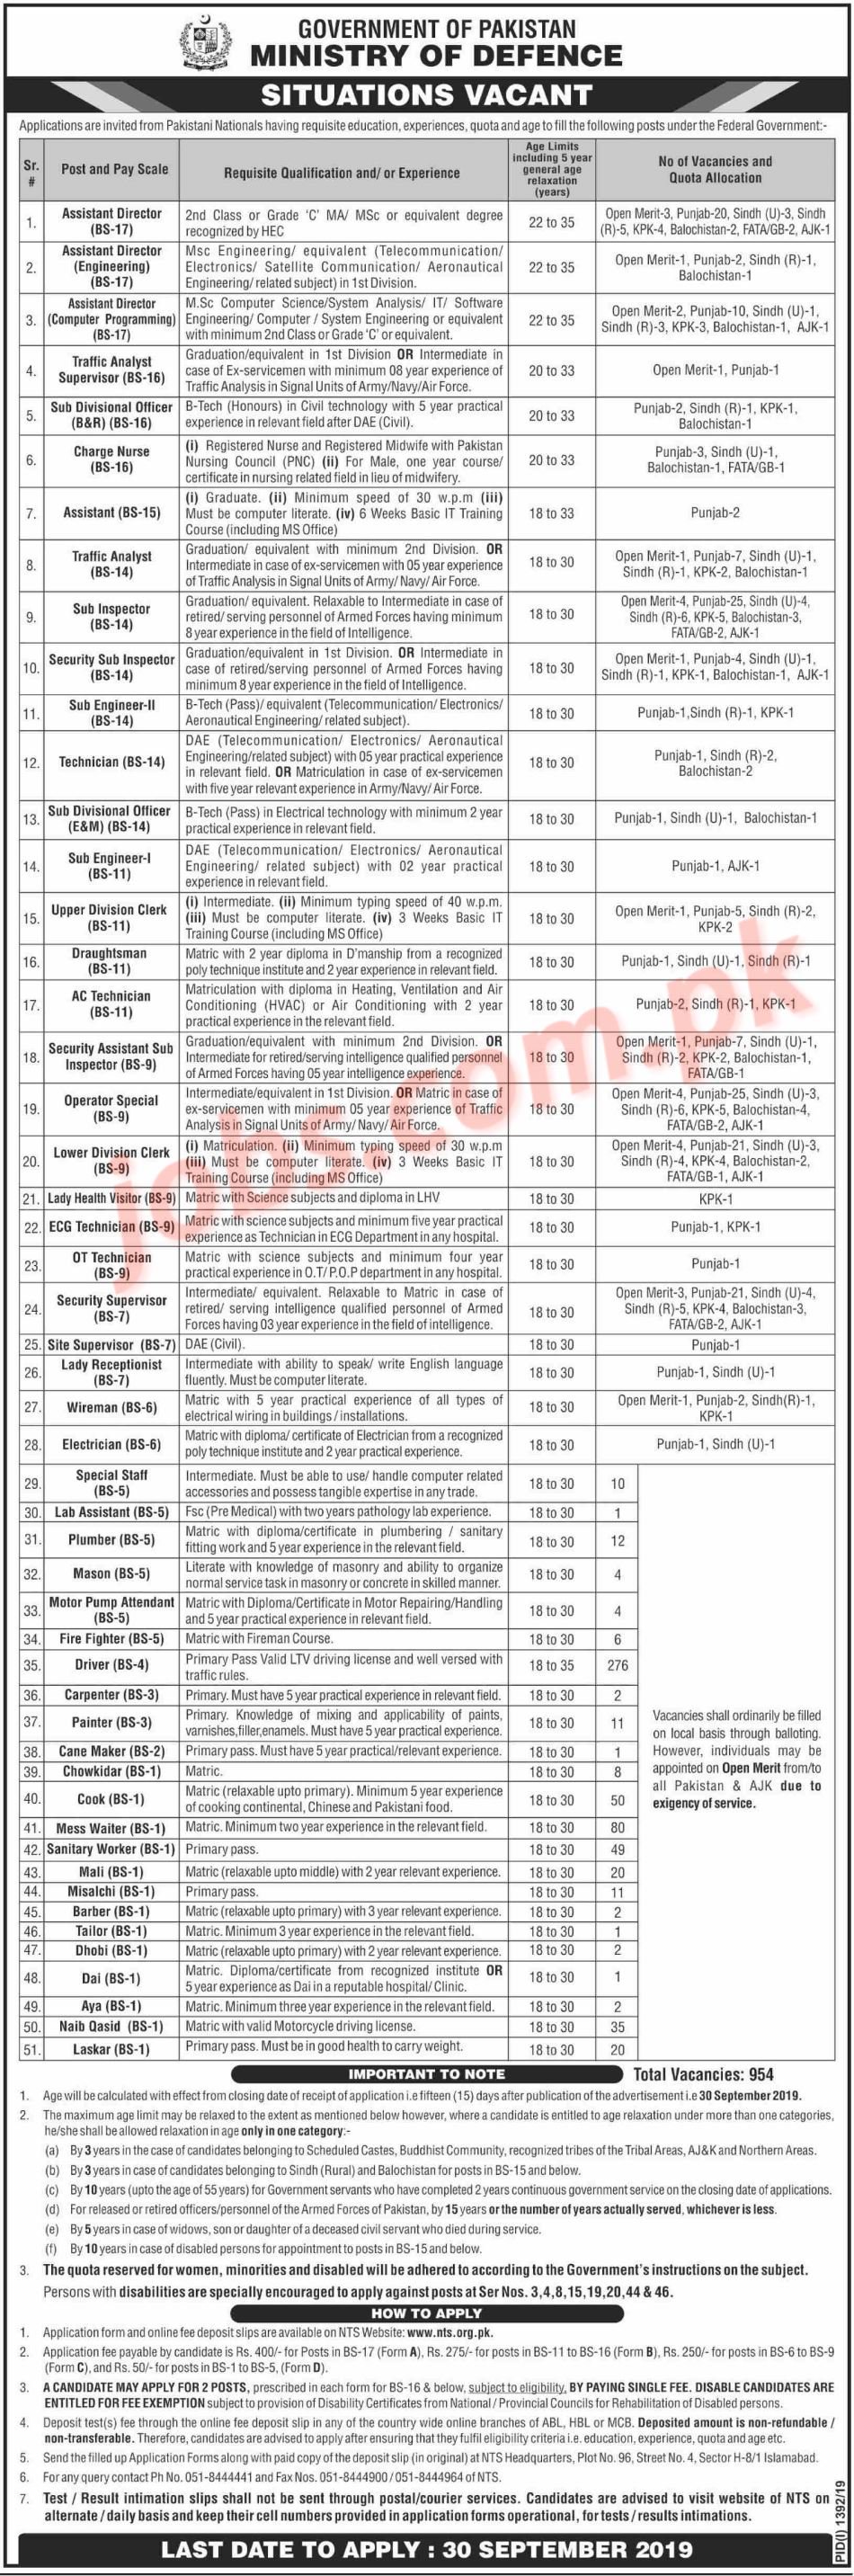 Ministry Of Defence Pakistan Jobs 2019 For 954+ Posts (BPS 1-17) (Download NTS Form)